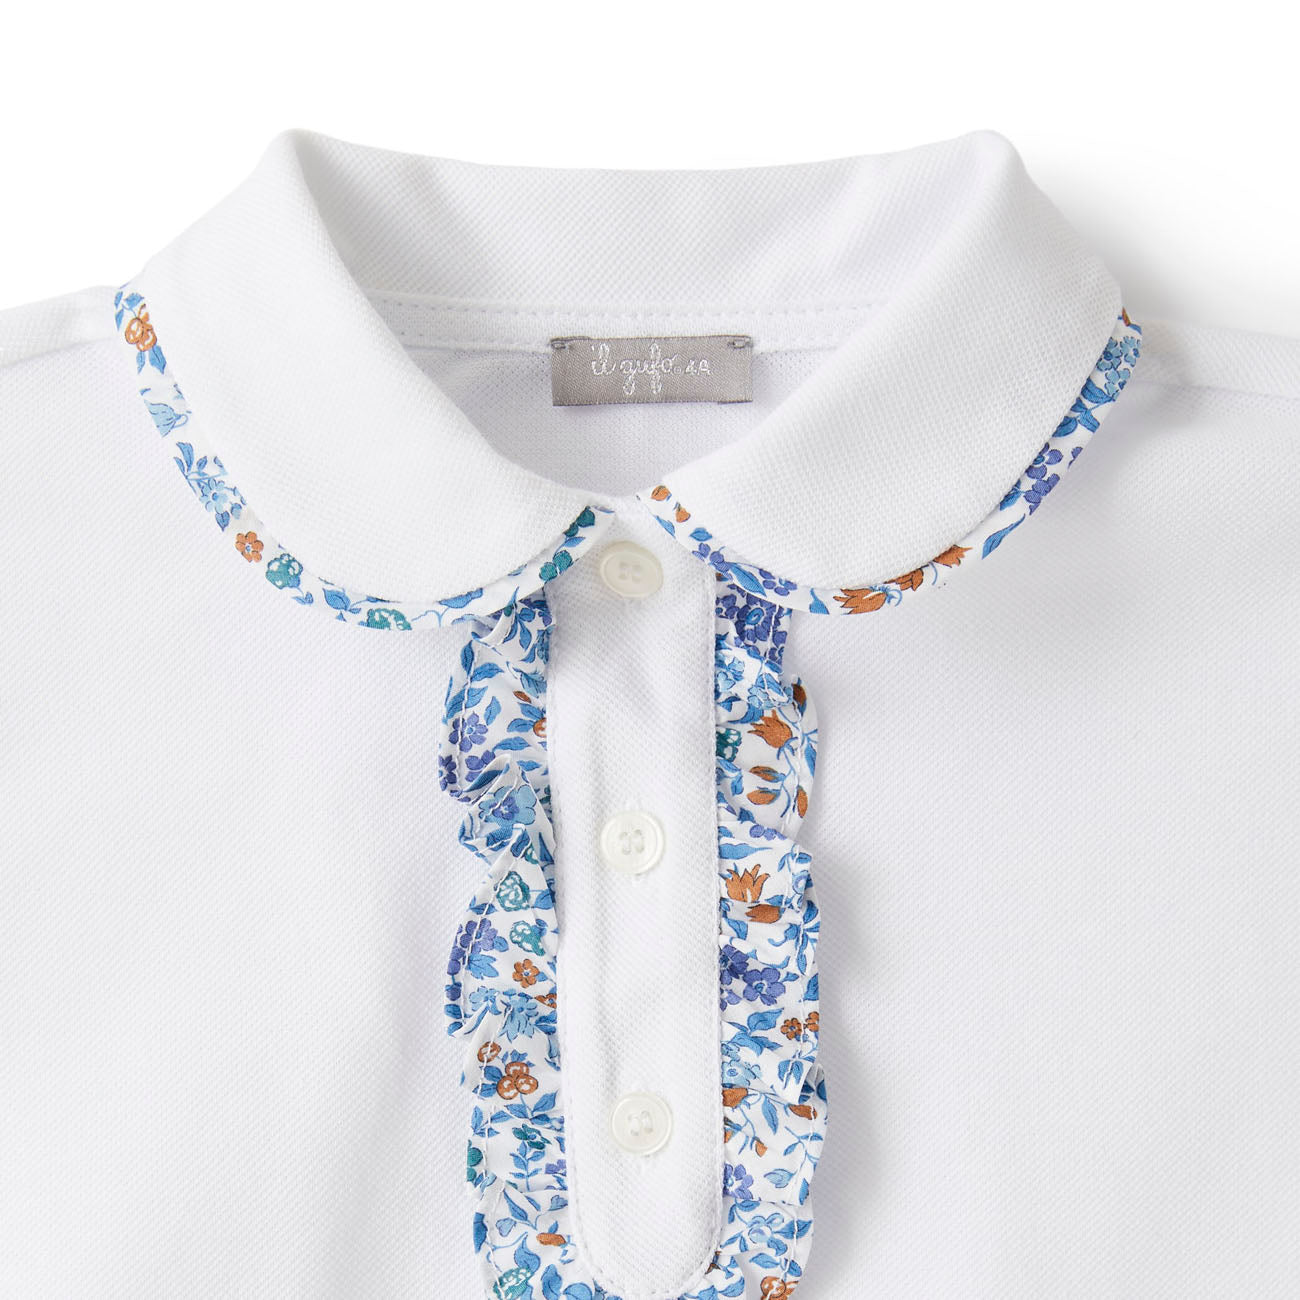 IL GUFO - White and Light Blue Polo Shirt S/S closeup front